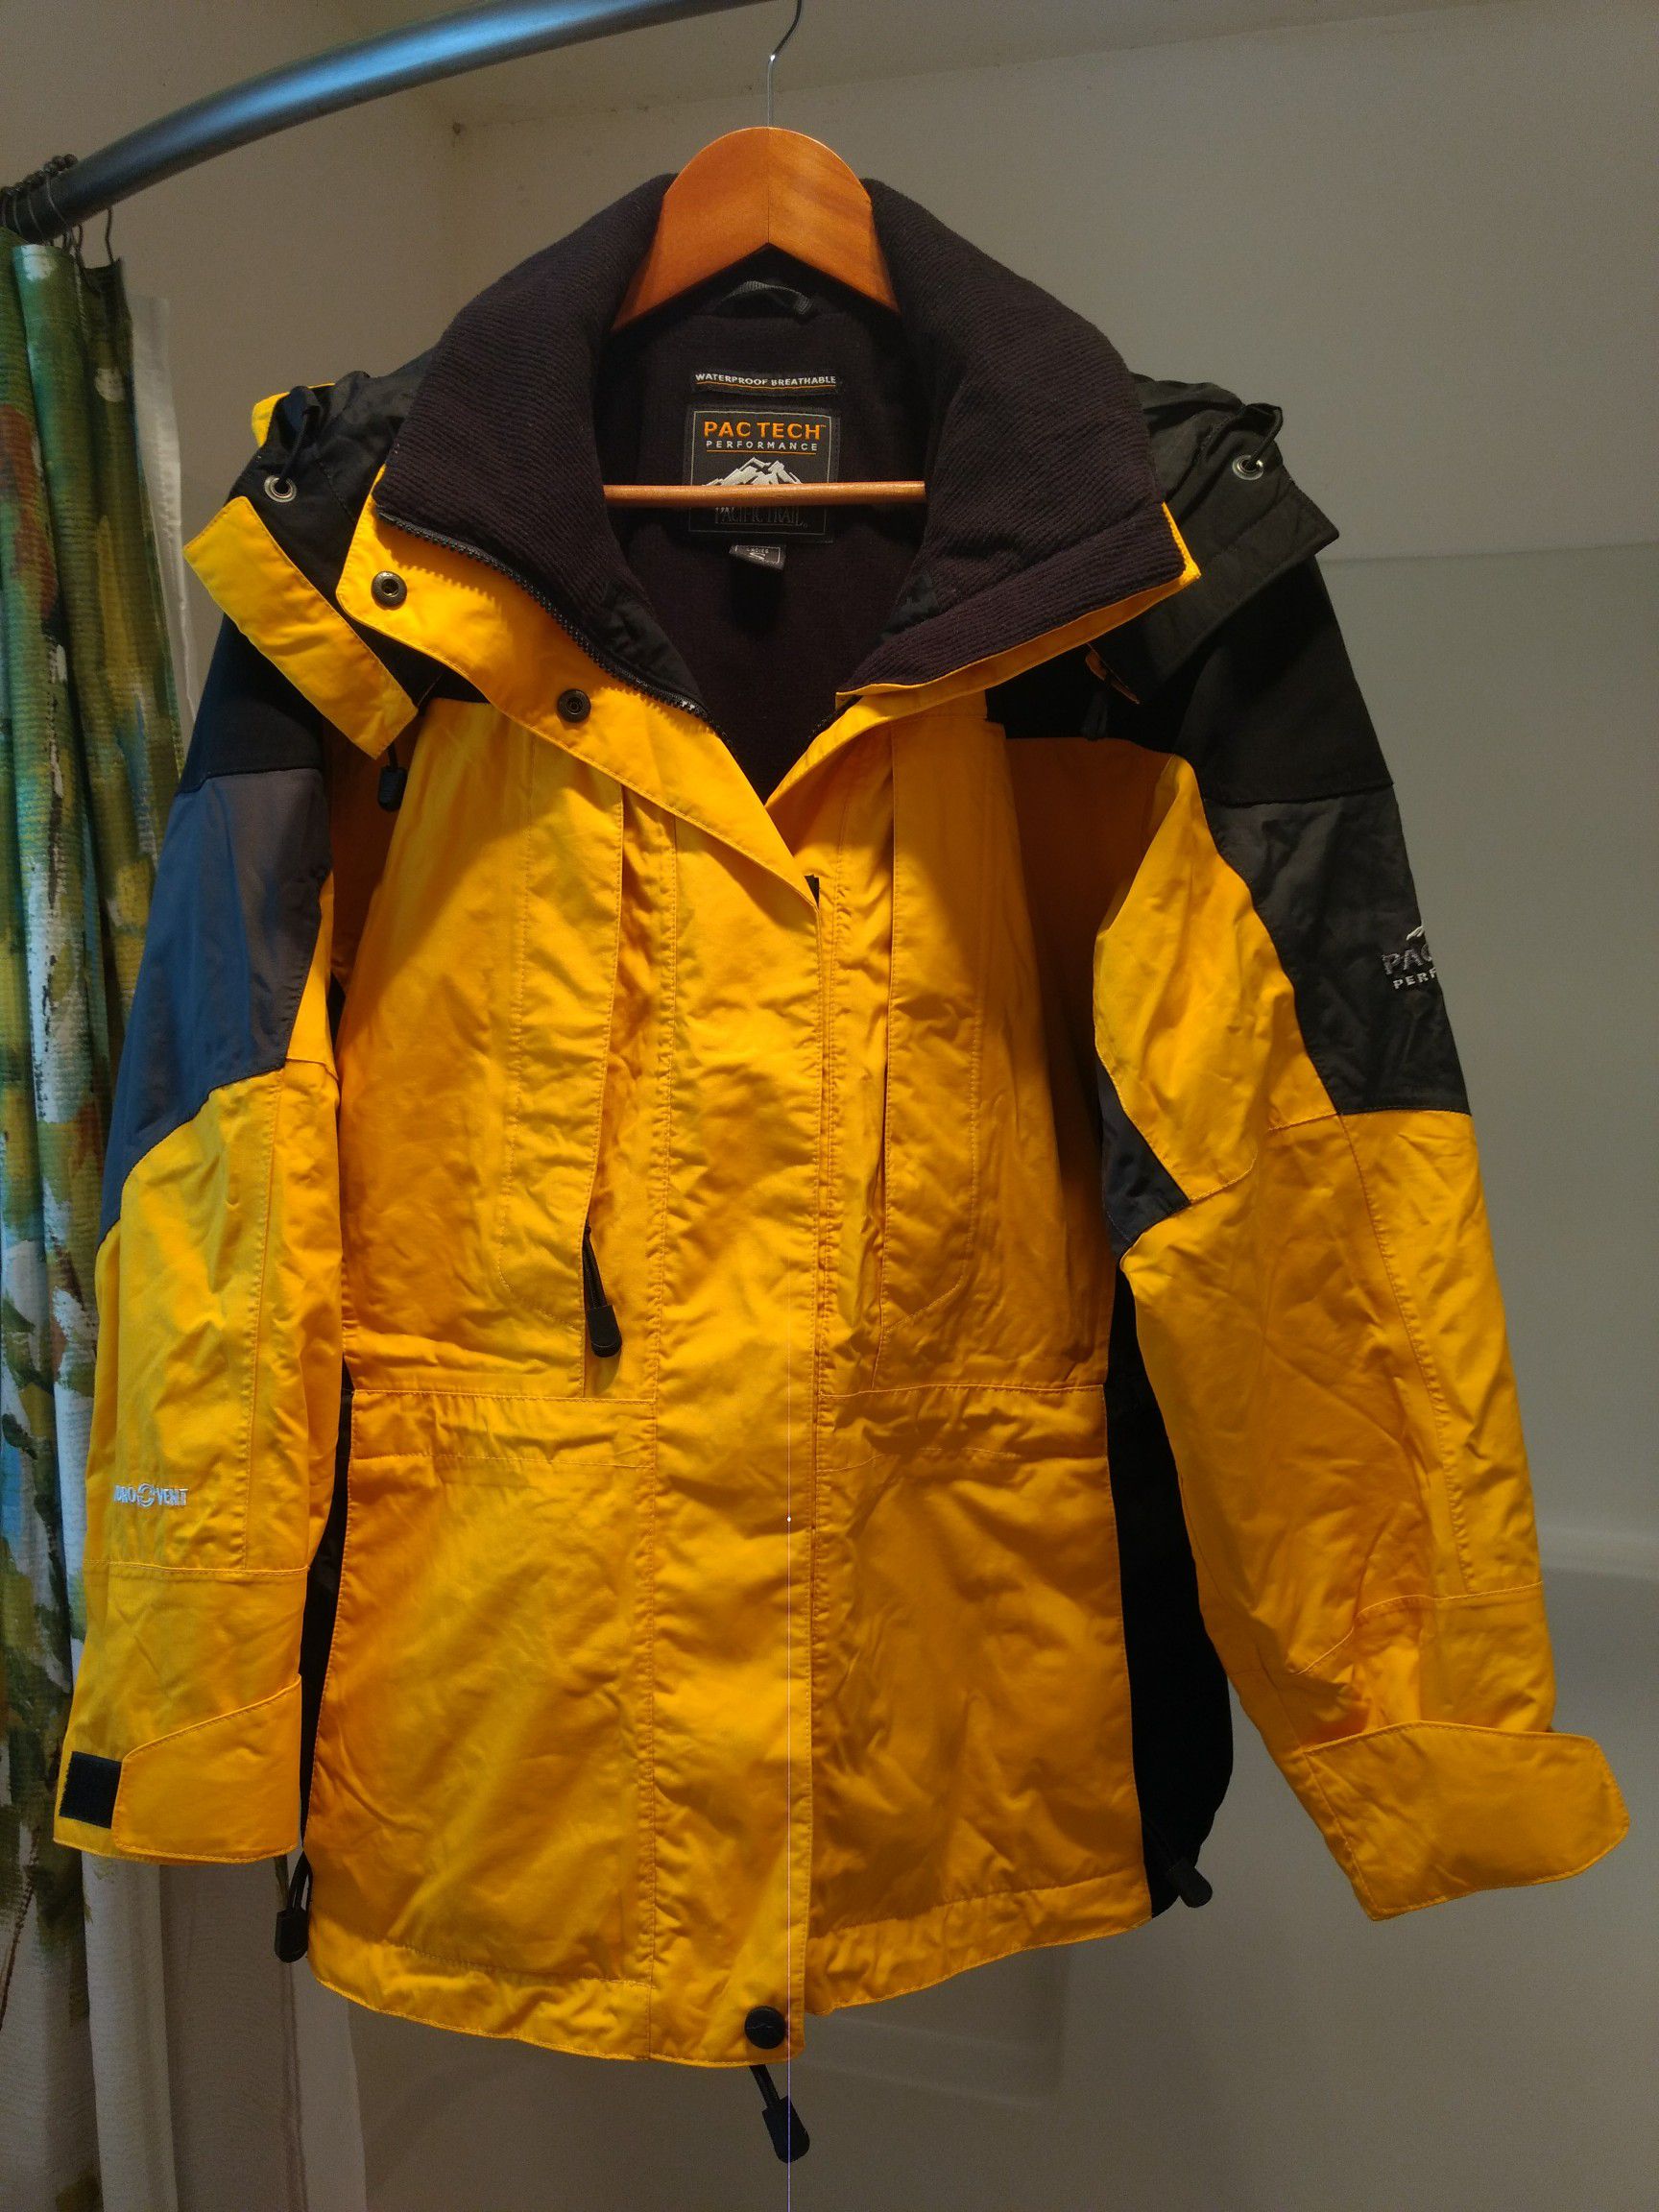 Pacific Trail Jacket